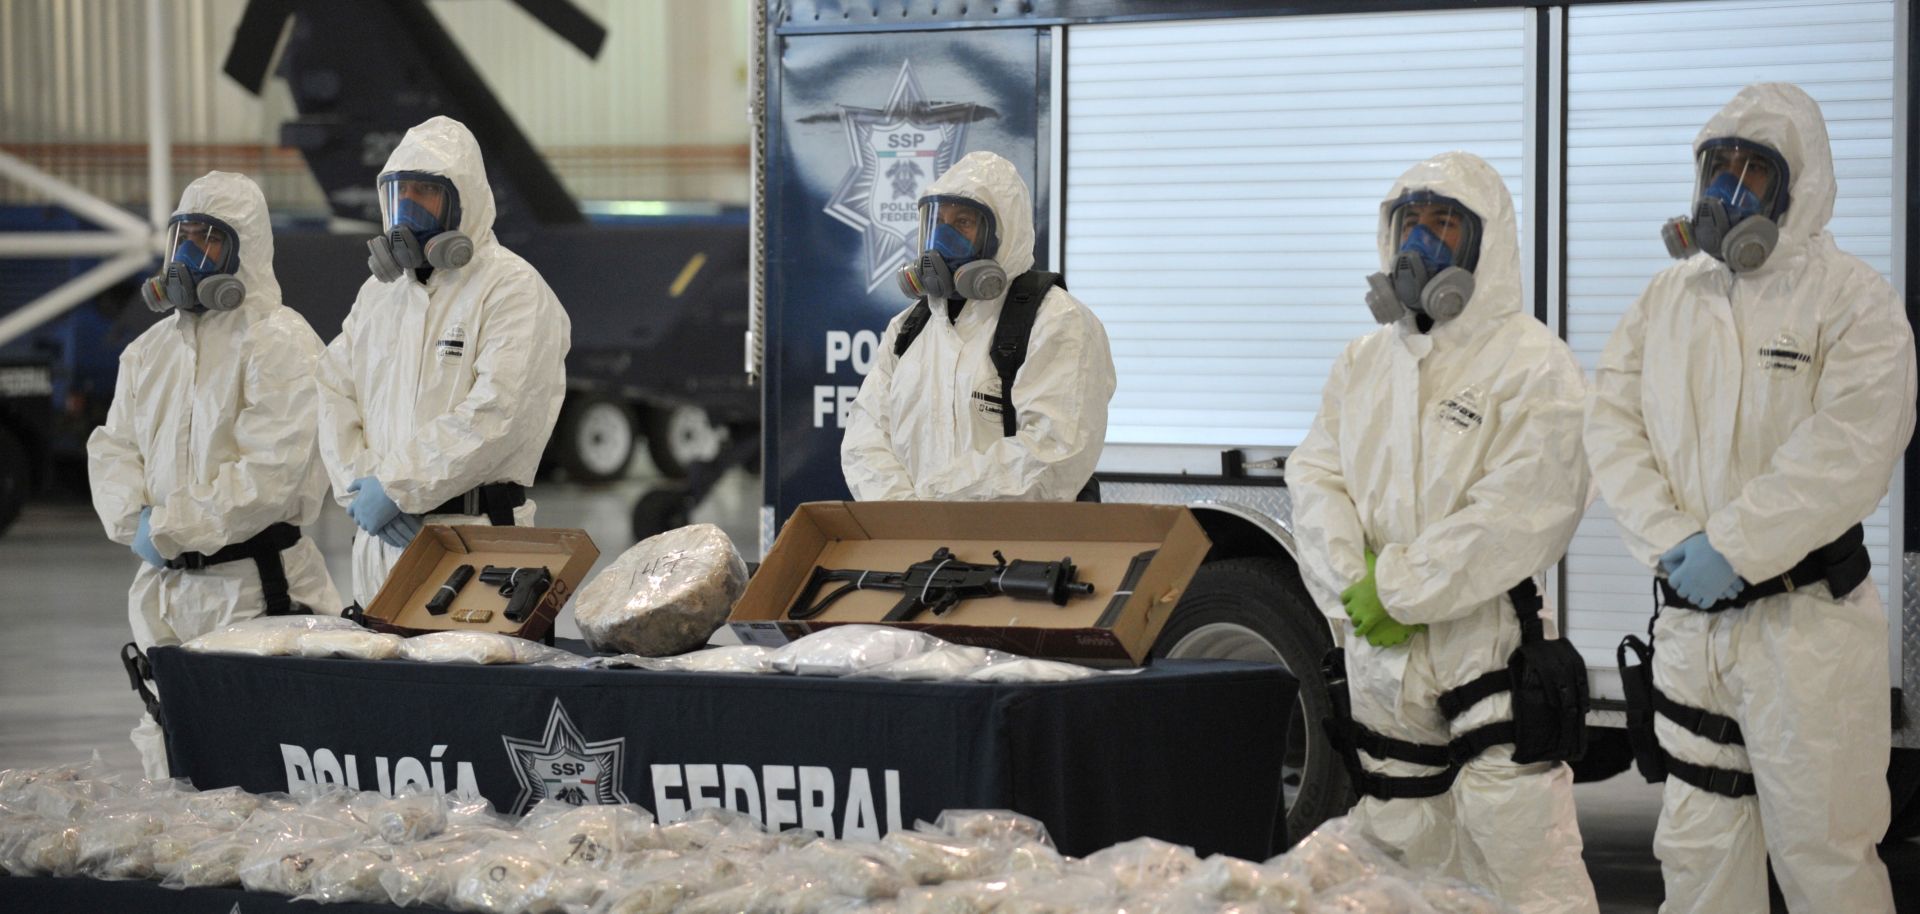 Mexican police shows off seized drugs and weapon to member of the media on February 14, 2012, in Mexico City. 